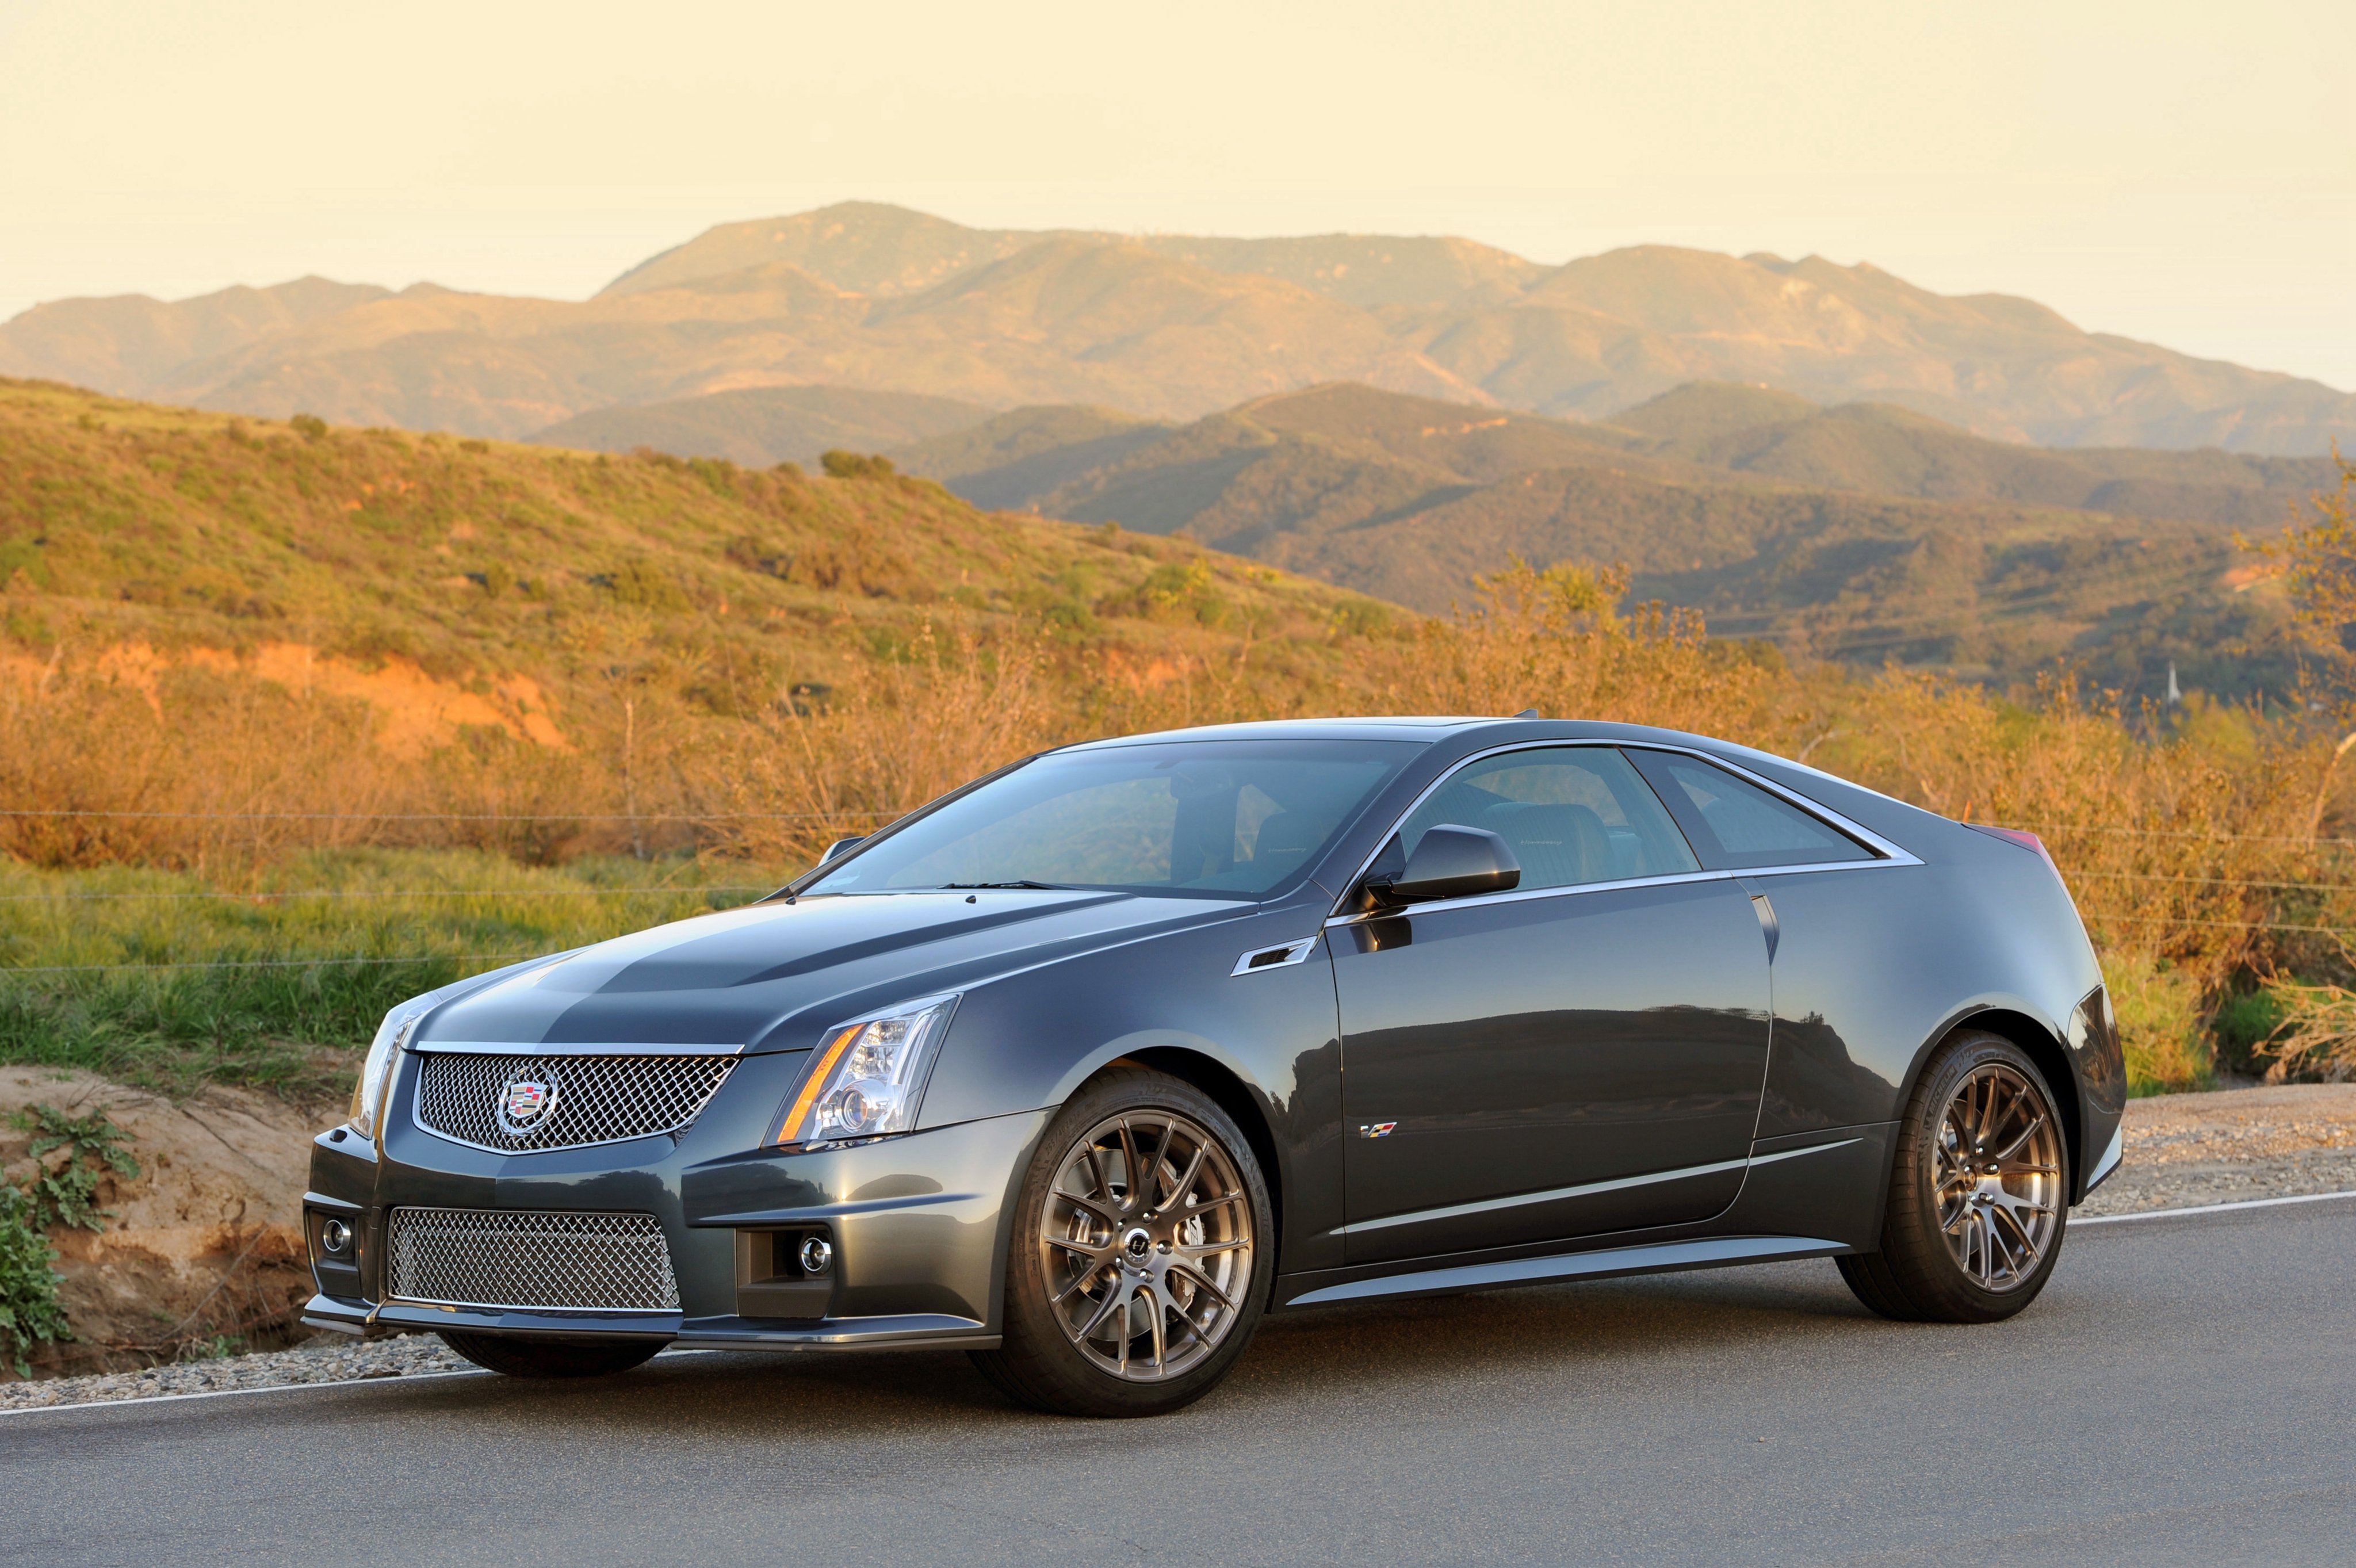 2012, Hennessey, Cadillac, Cts v, V700, Coupe, Muscle, Cts Wallpaper